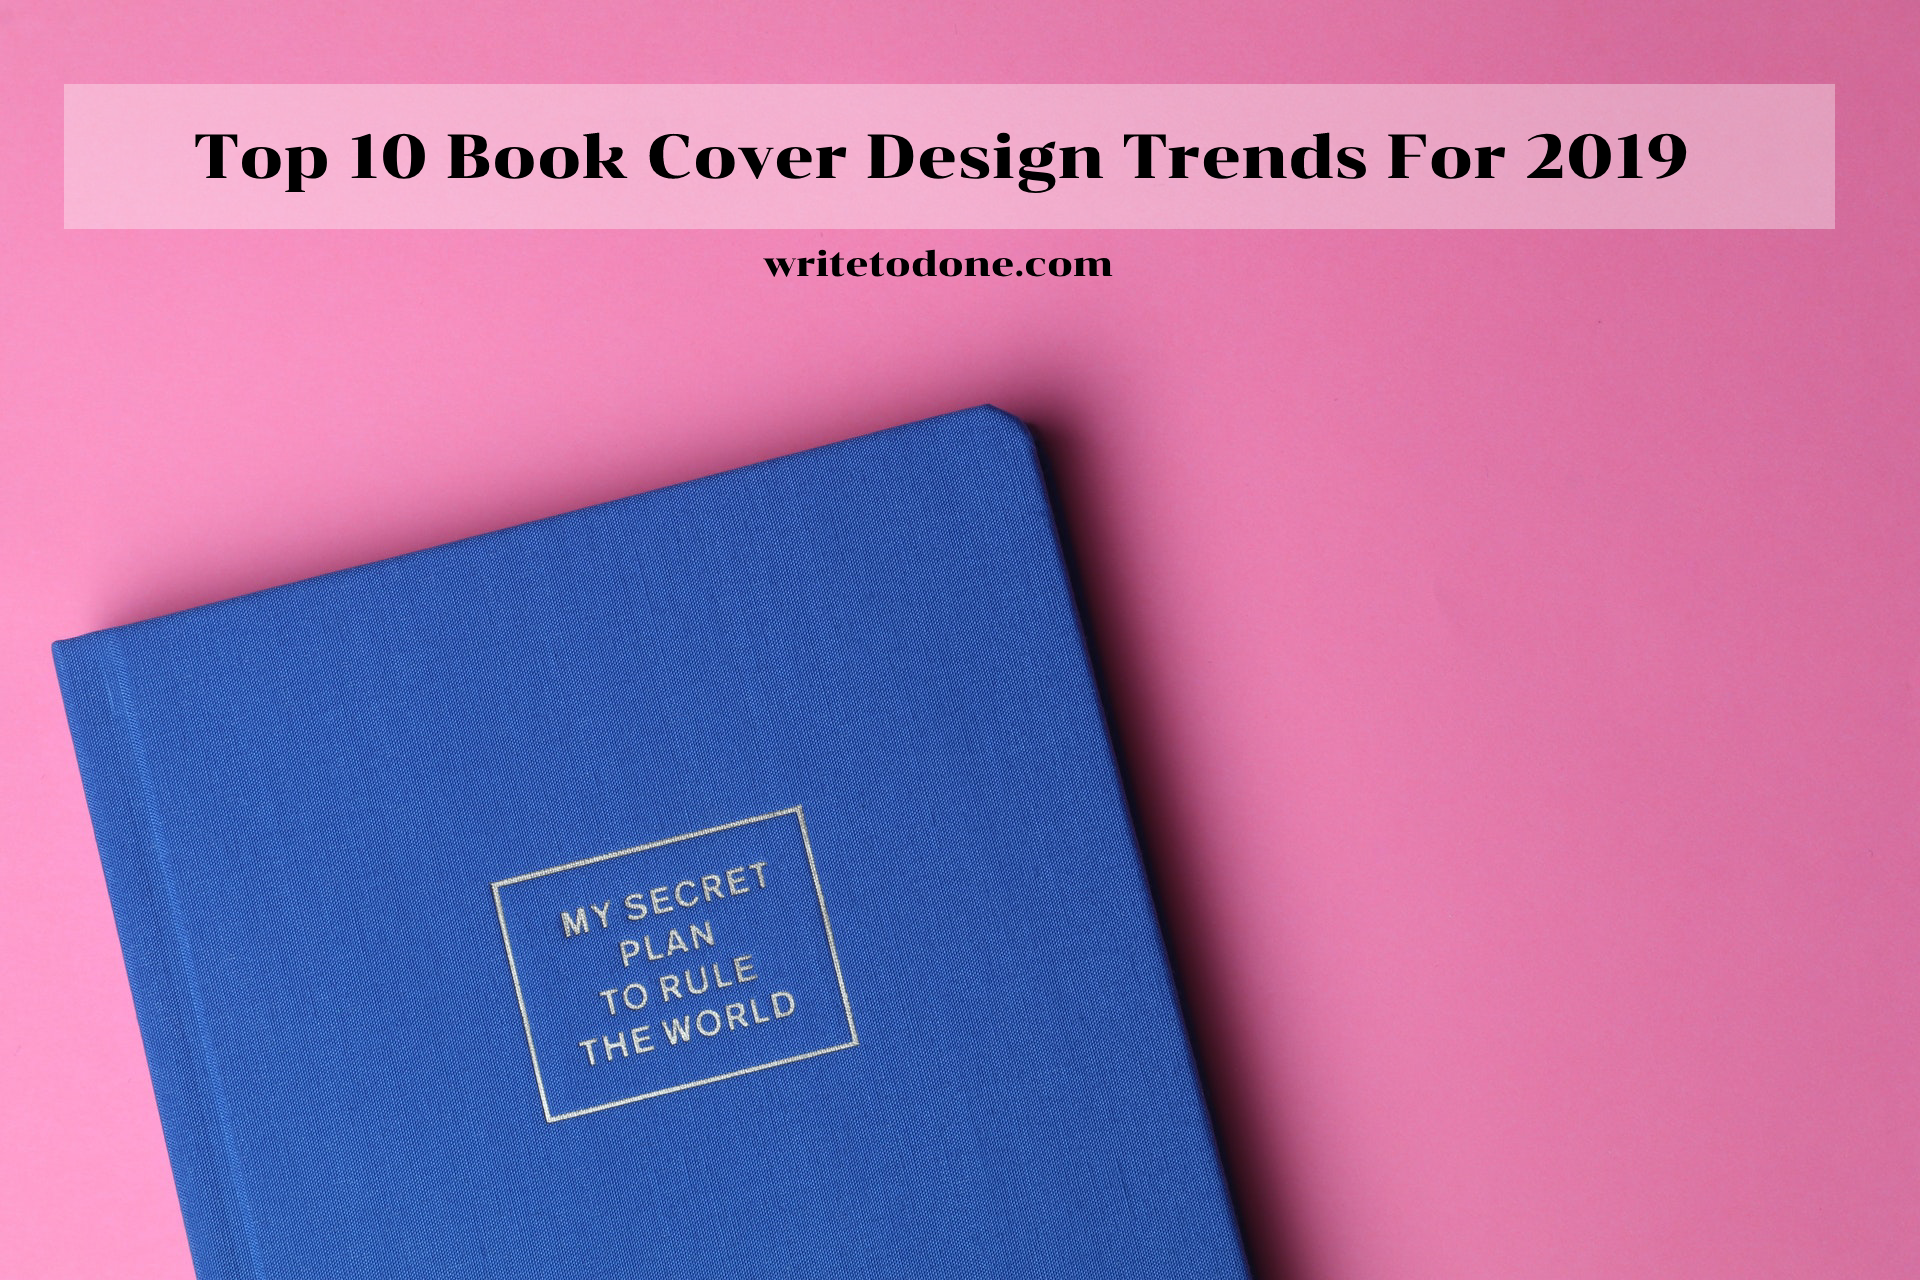 Top 10 Book Cover Design Trends For 2019